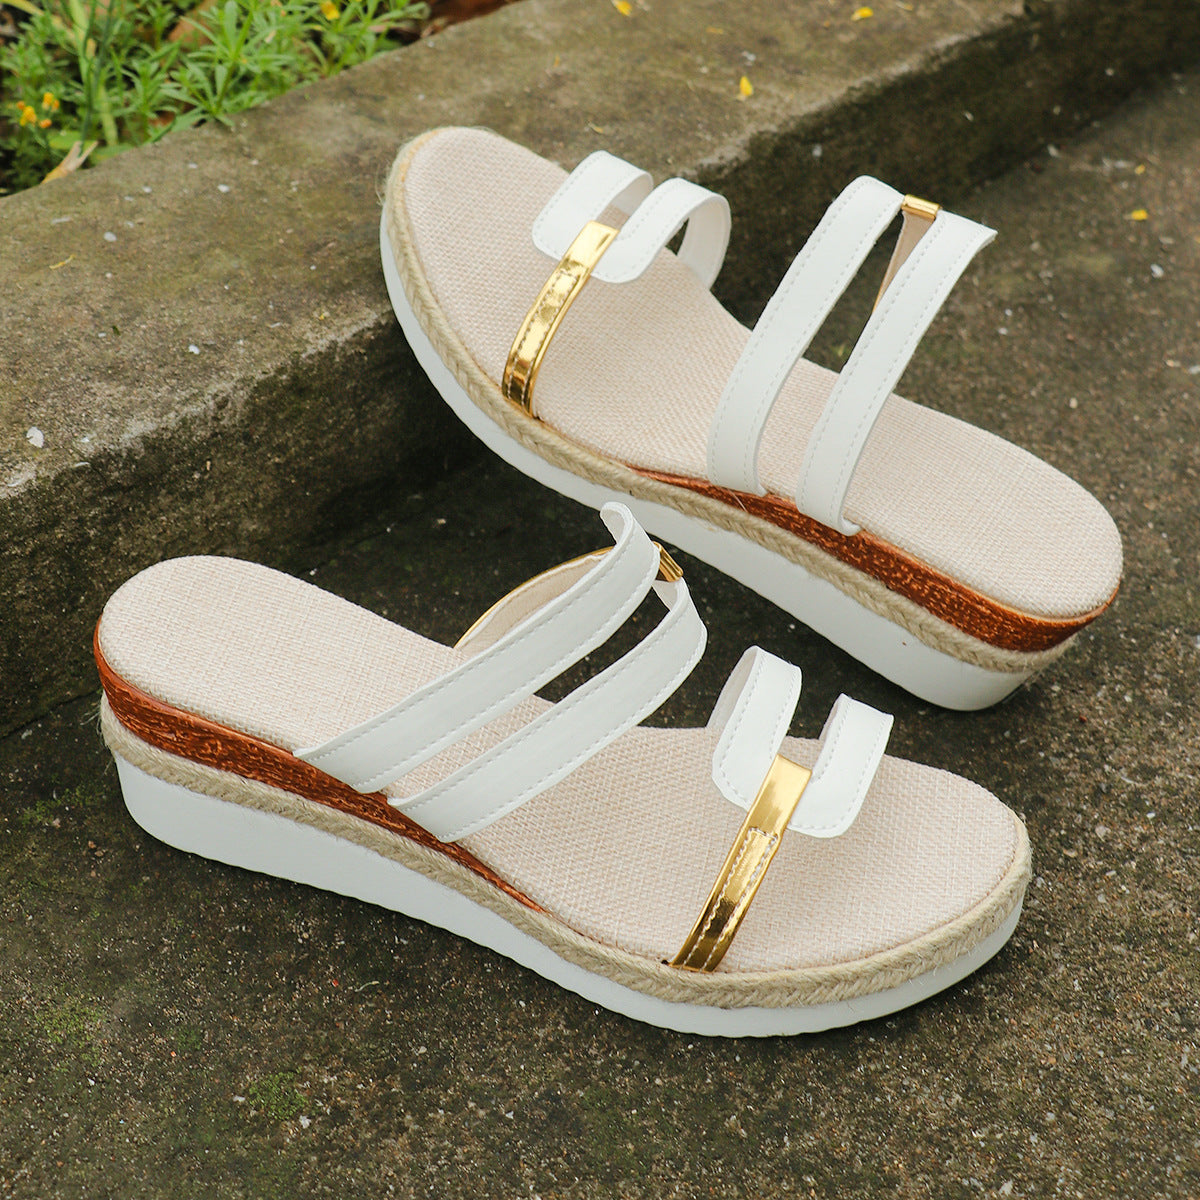 Colorblock-strap Wedges Sandals Summer Fashion Hemp Heel Slides Slippers Outdoor Thick Bottom Fish Mouth Shoes For Women